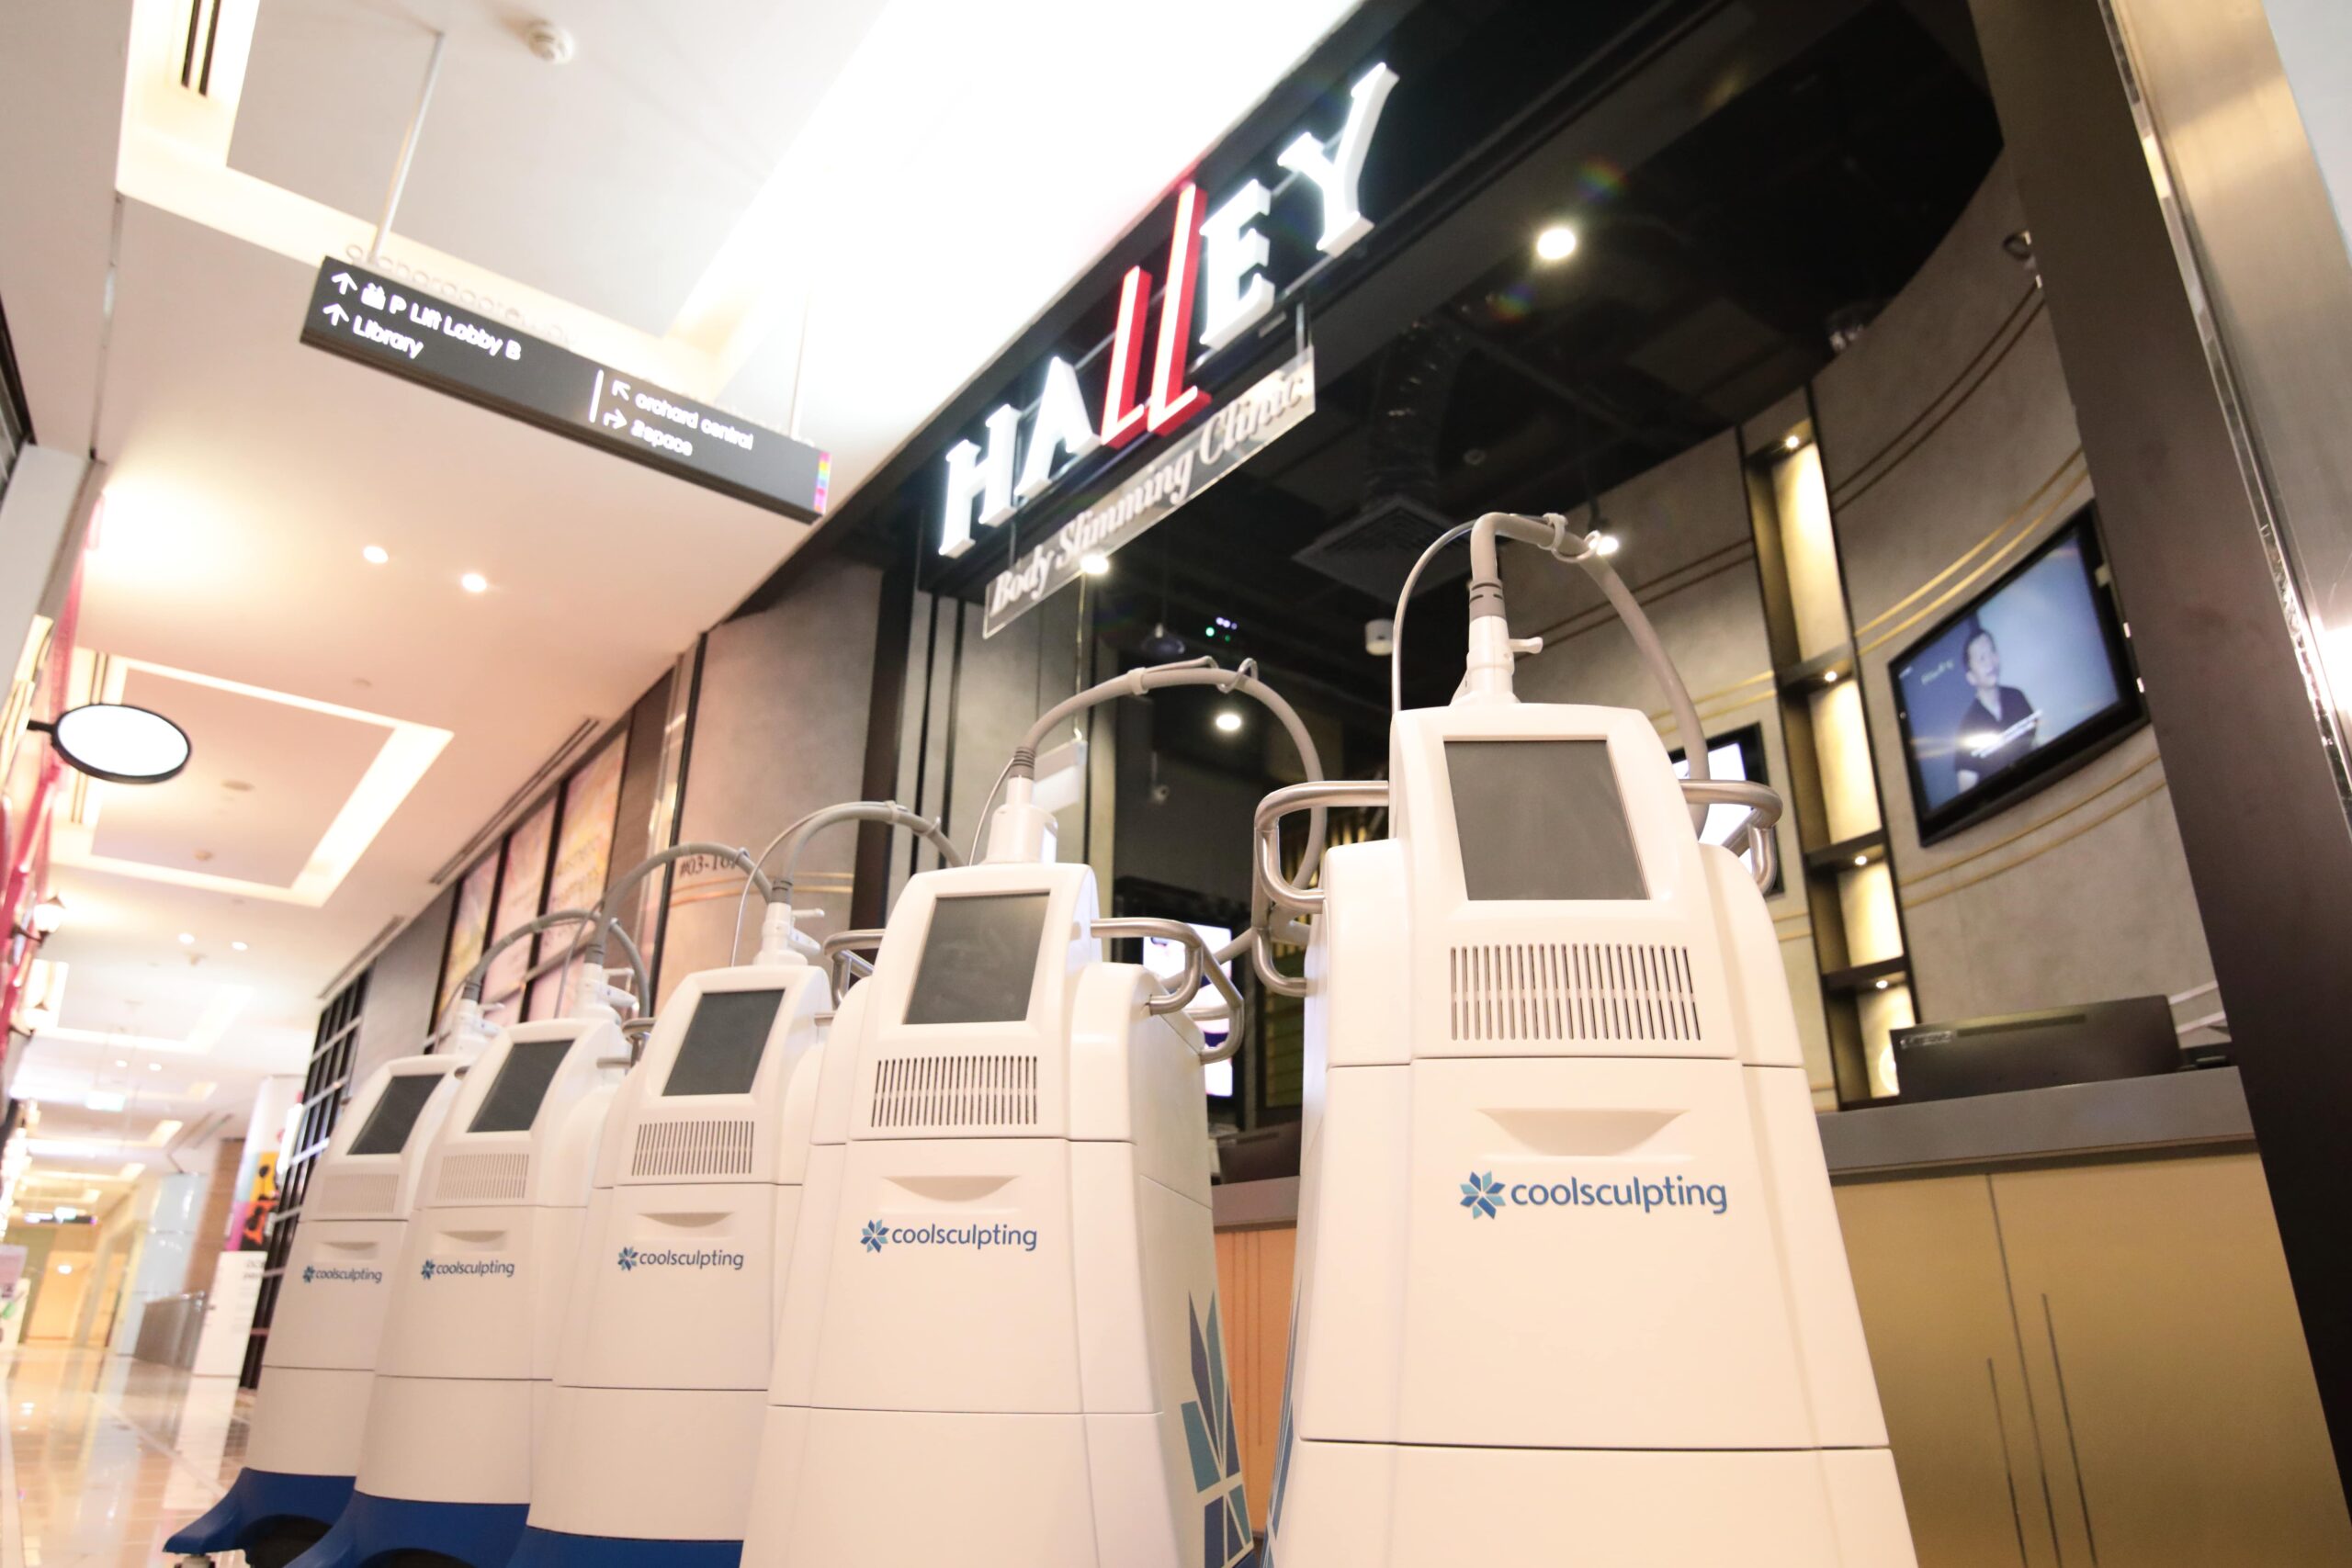 Halley Medical Aesthetics Singapore | Services